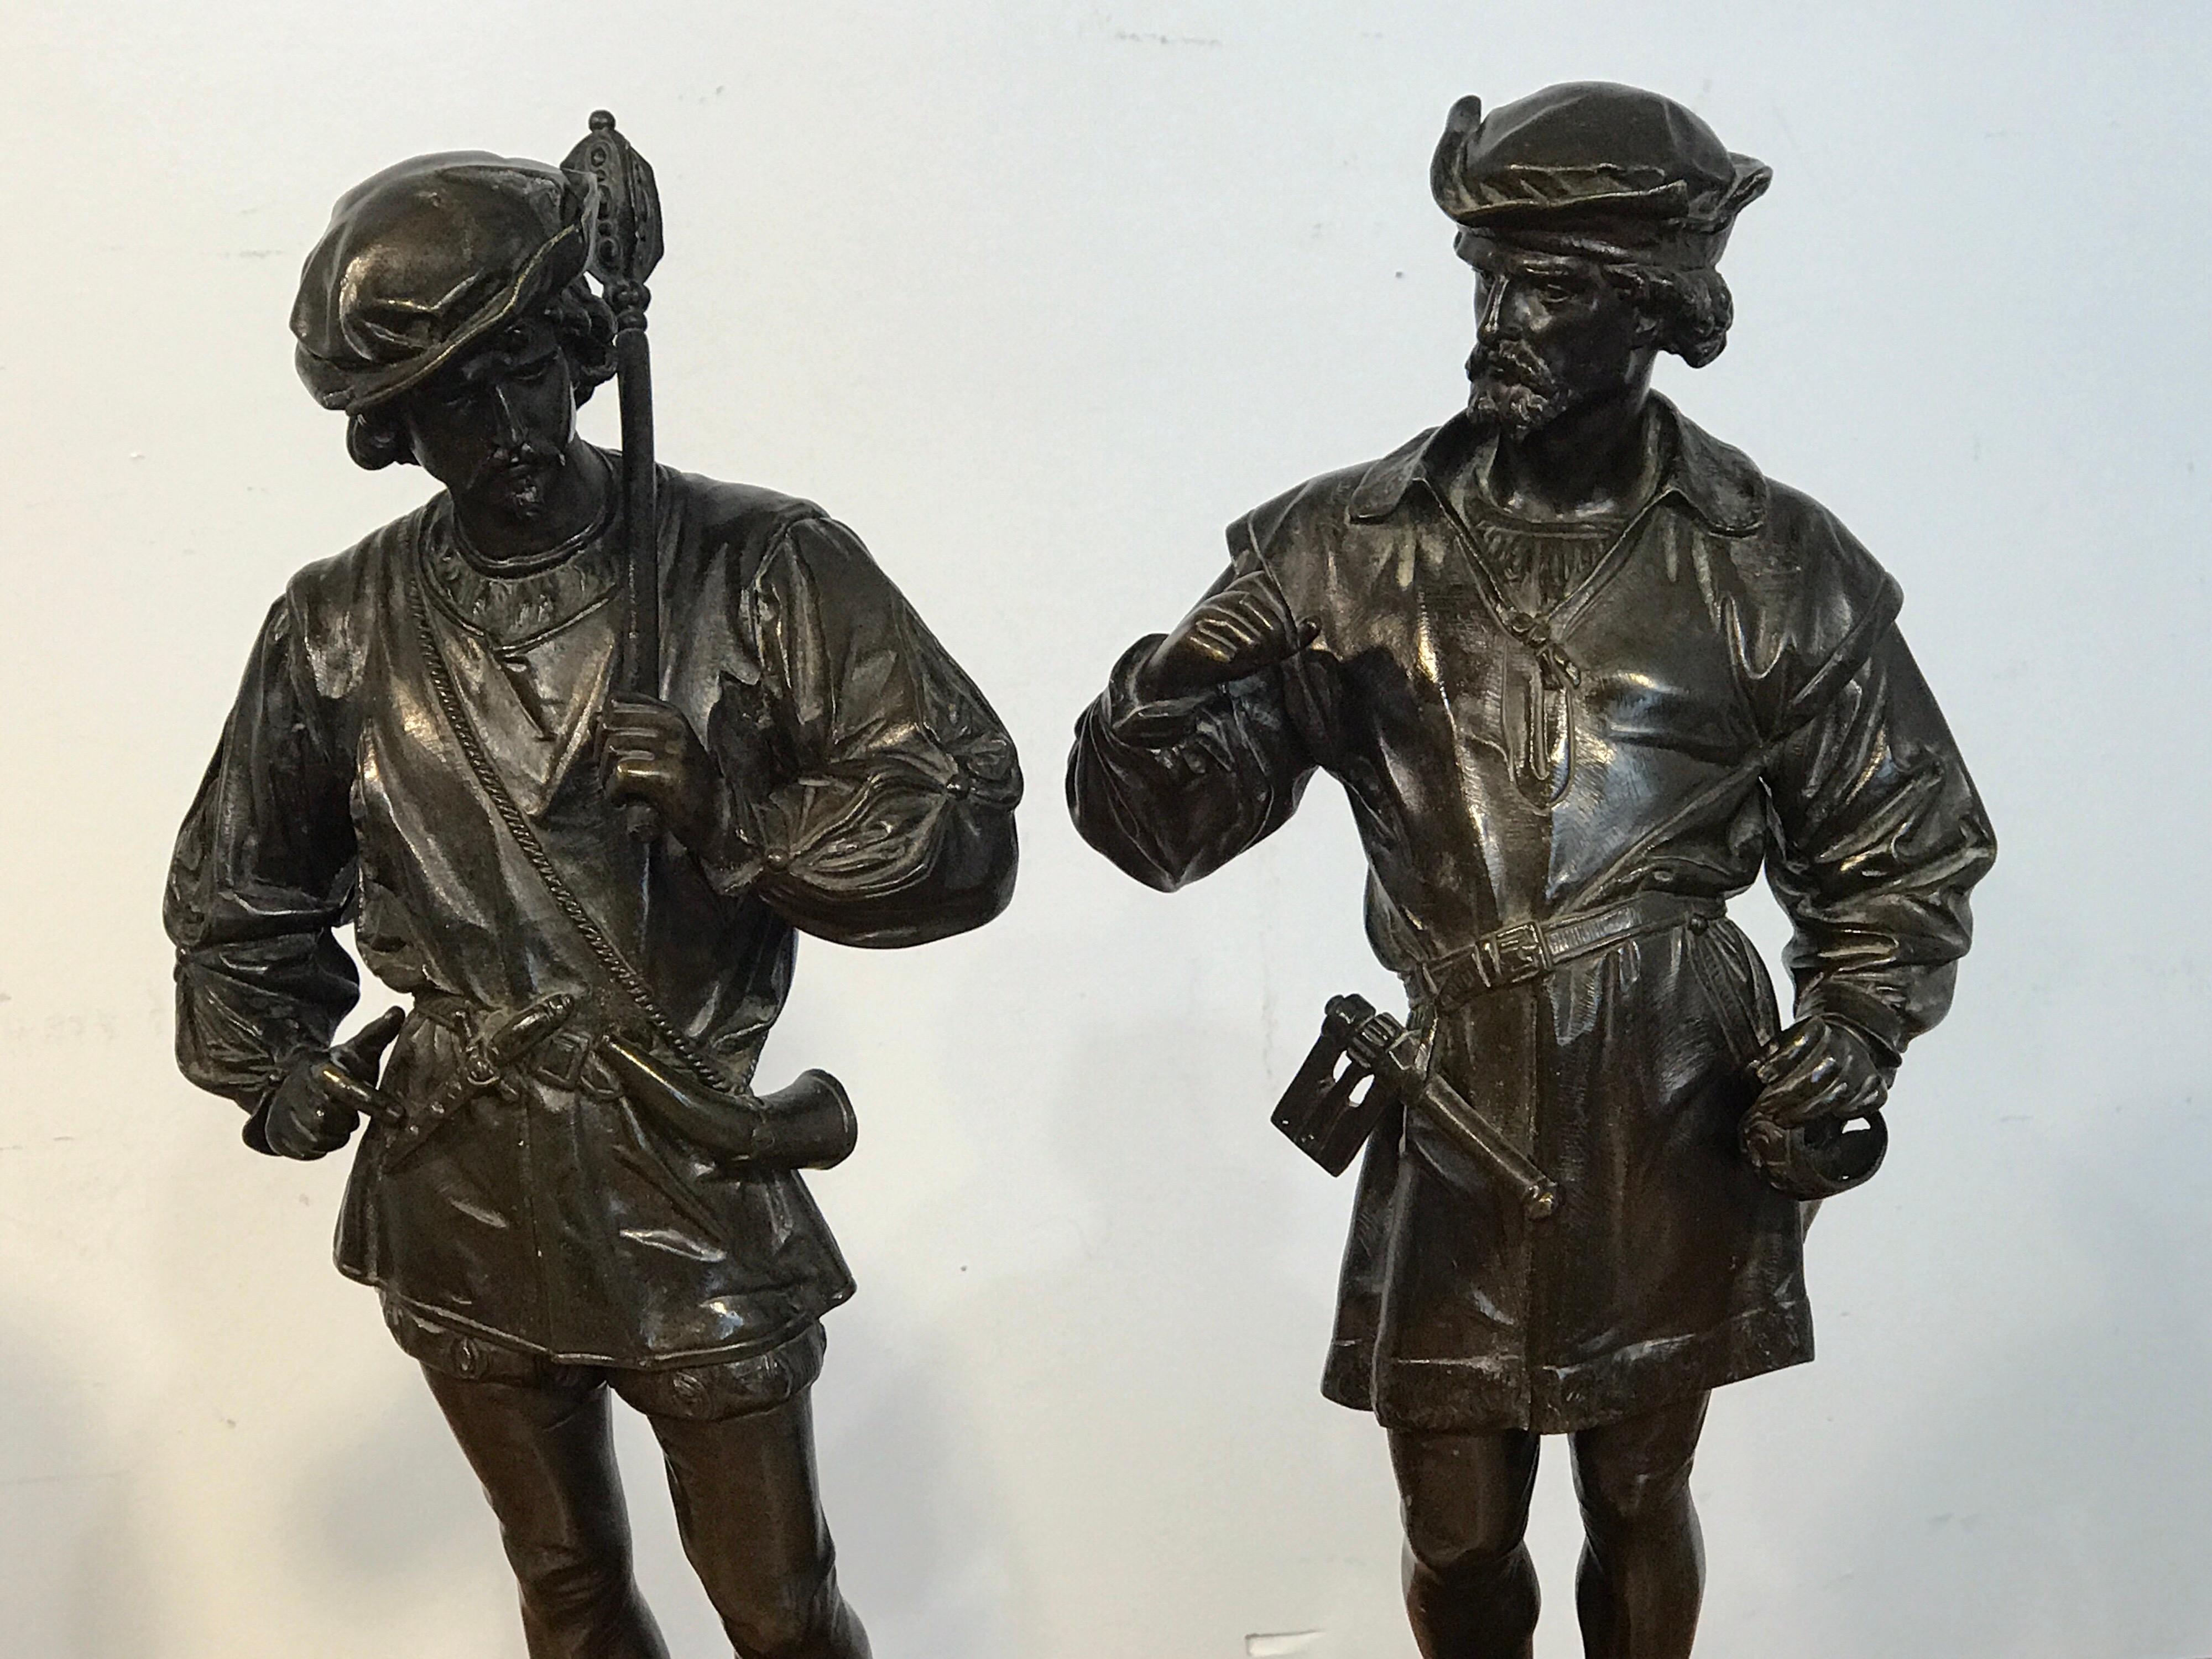 Pair of orientalist bronzes of standing Turks, signed Guillot,
Anatole-Jean-Thomas Guillot French (1865-1911)
Each one intricately dressed holding weapons, raised on Belgian black marble plinths.
 